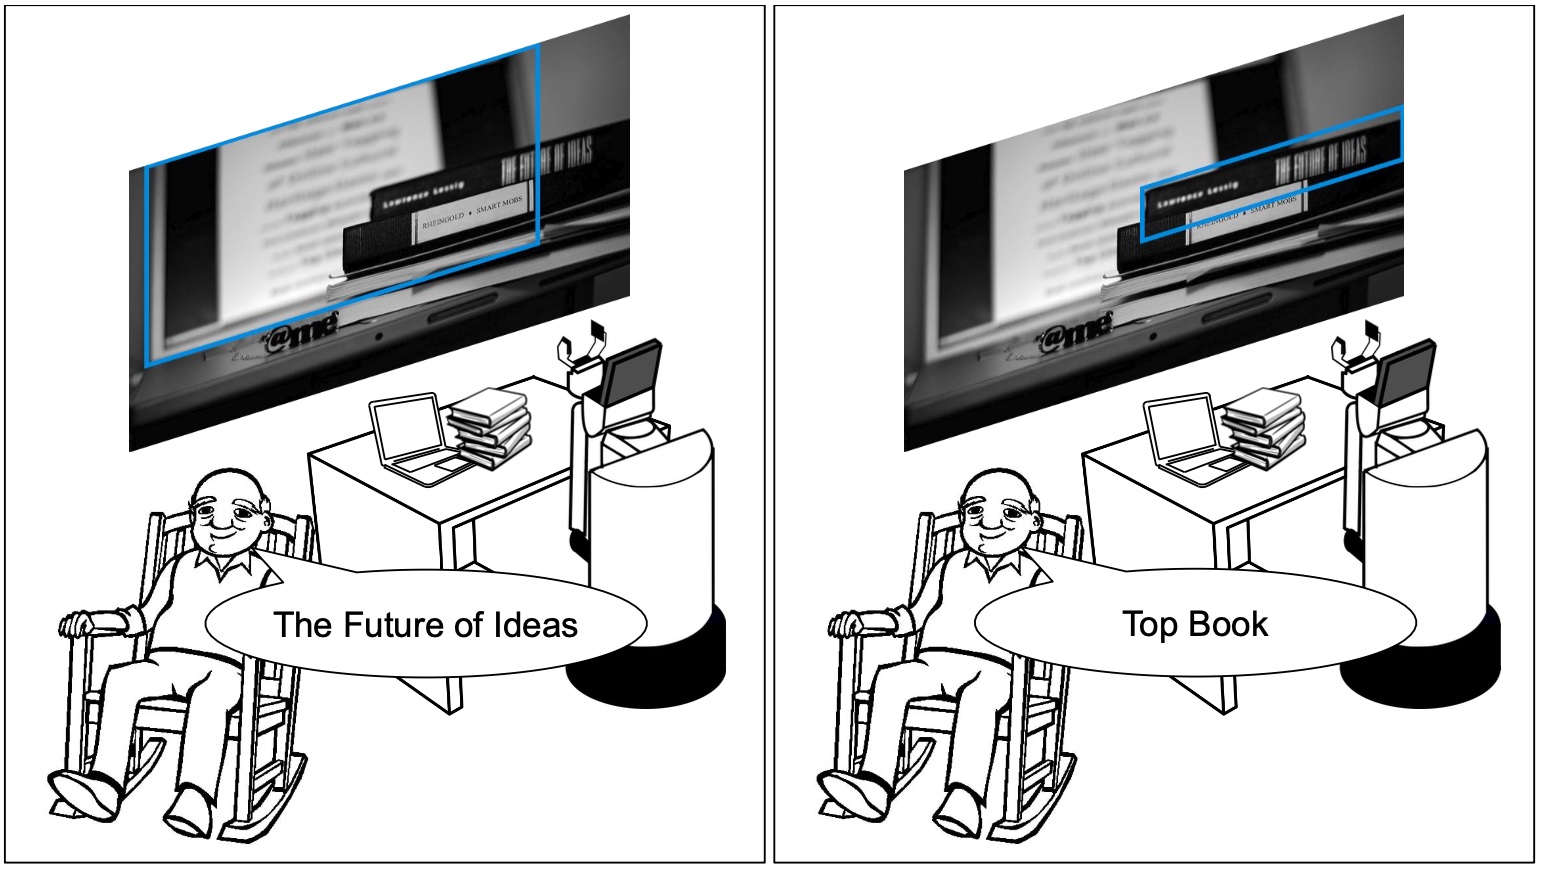 This figure illustrates the scenario of a human support robot designed to perform tasks for the elderly or those with mobility impairments. The human is looking for his book, The Future of Ideas, which is the top book in the stack located on his desk, next to a computer monitor. However, 'The Future of Ideas' may be ambiguious, as the phrase is also displayed on the computer monitor. Using deferred inference, the robot may ask the human to reframe their query, 'Top Book', at which point the robot is confident what the user is referring to.